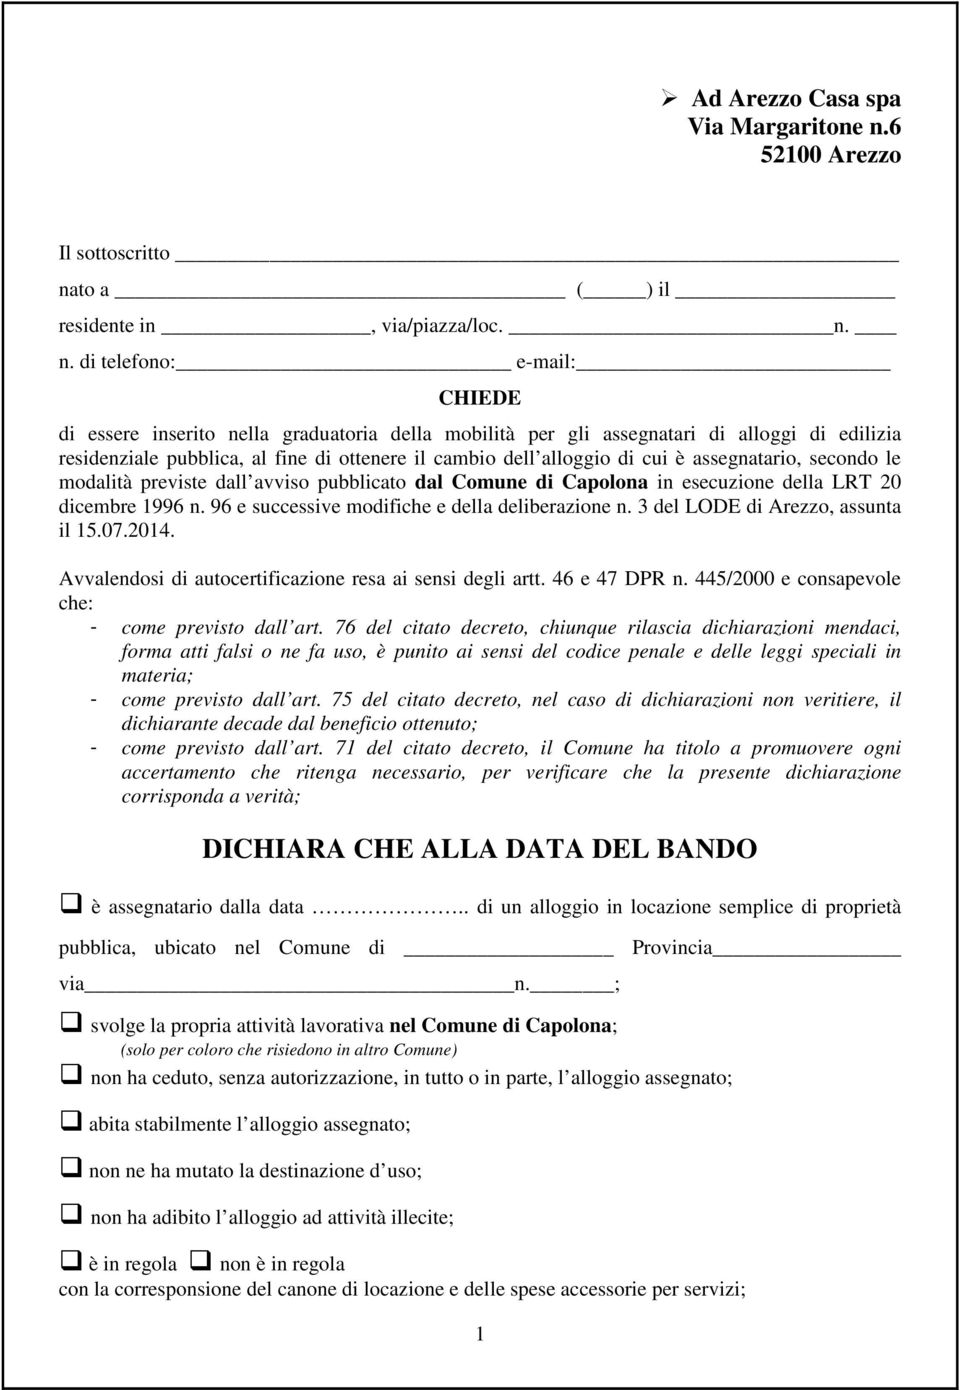 to a ( ) il residente in, via/piazza/loc. n.